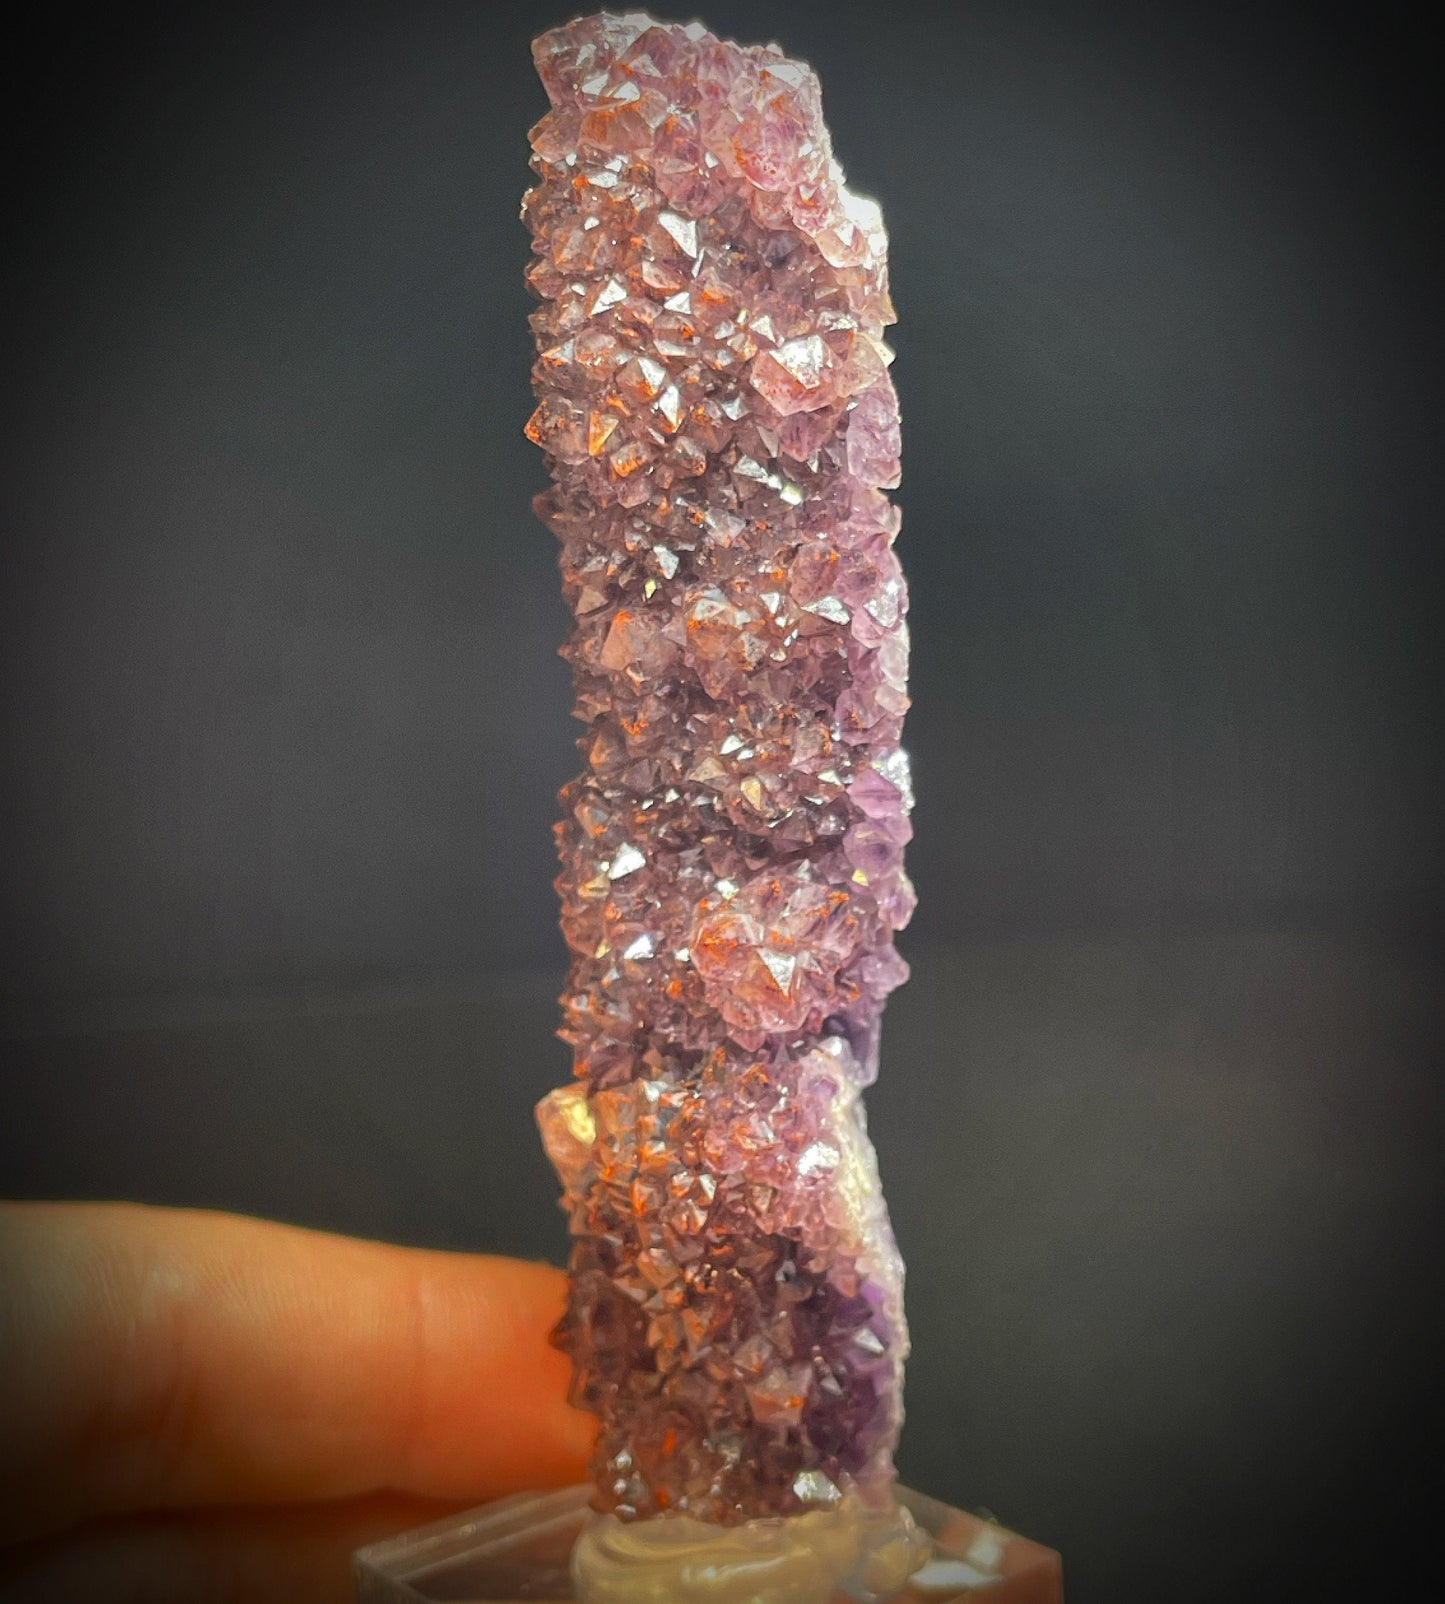 Exceptional Amethyst With Hematite Inclusions From The Moon Light Mine, Thunder Bay, Ontario, Canada Piece, Home décor, Perfect Gift